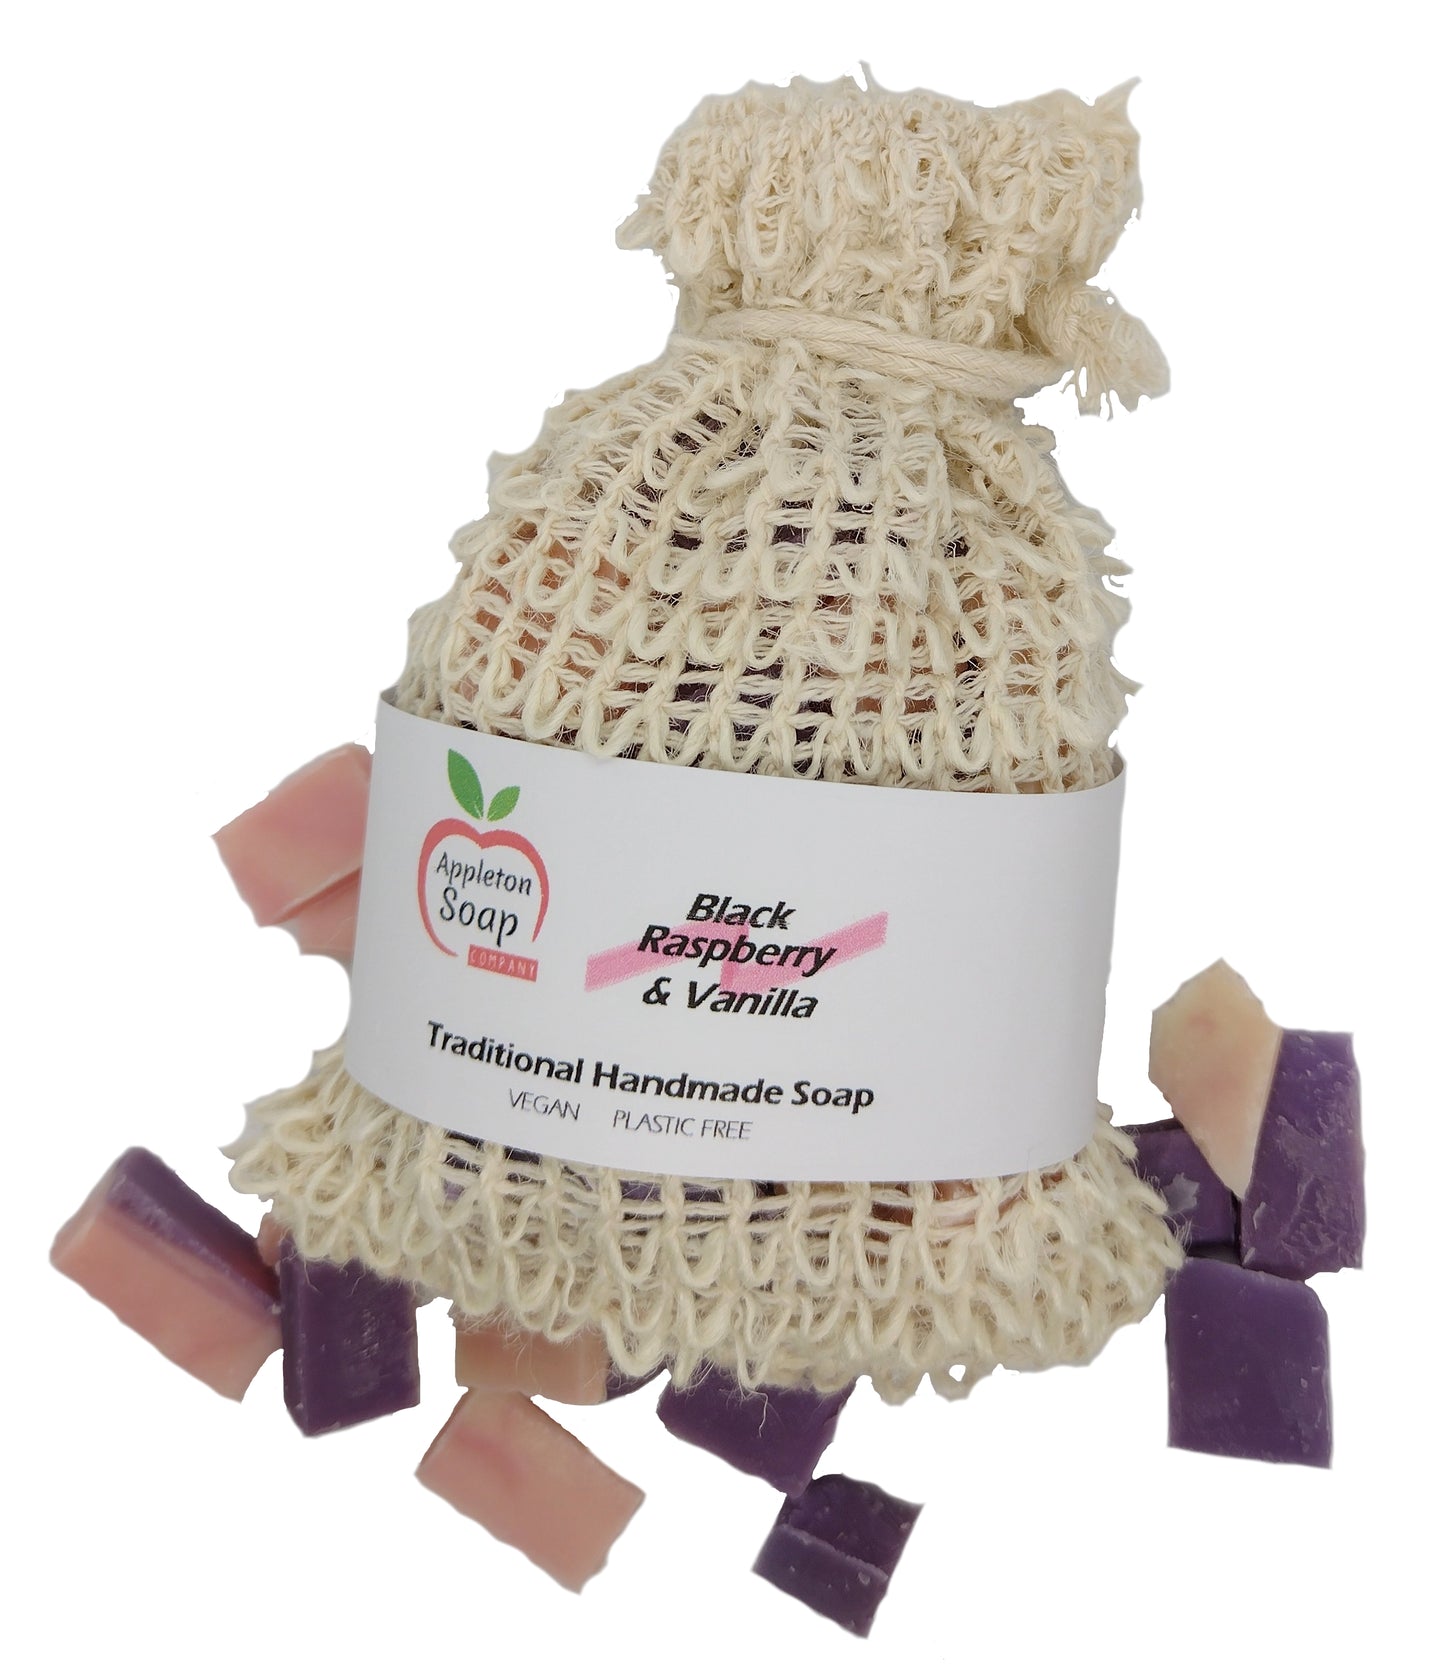 Sisal bag with white wrap around label with Black raspberry and vanilla soap around base